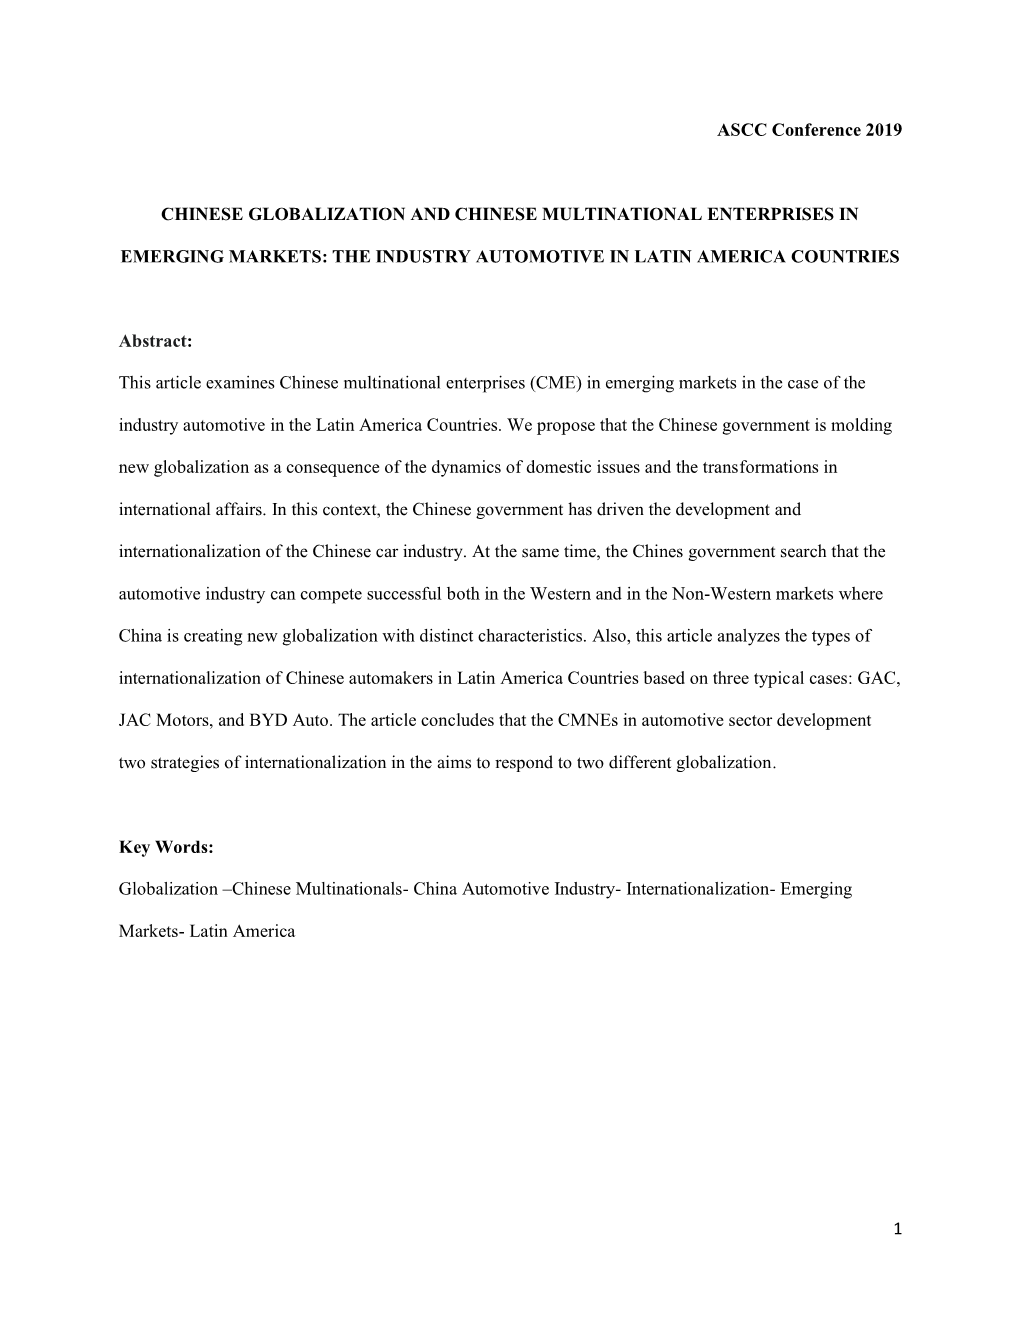 Chinese Globalization and Chinese Multinational Enterprises In